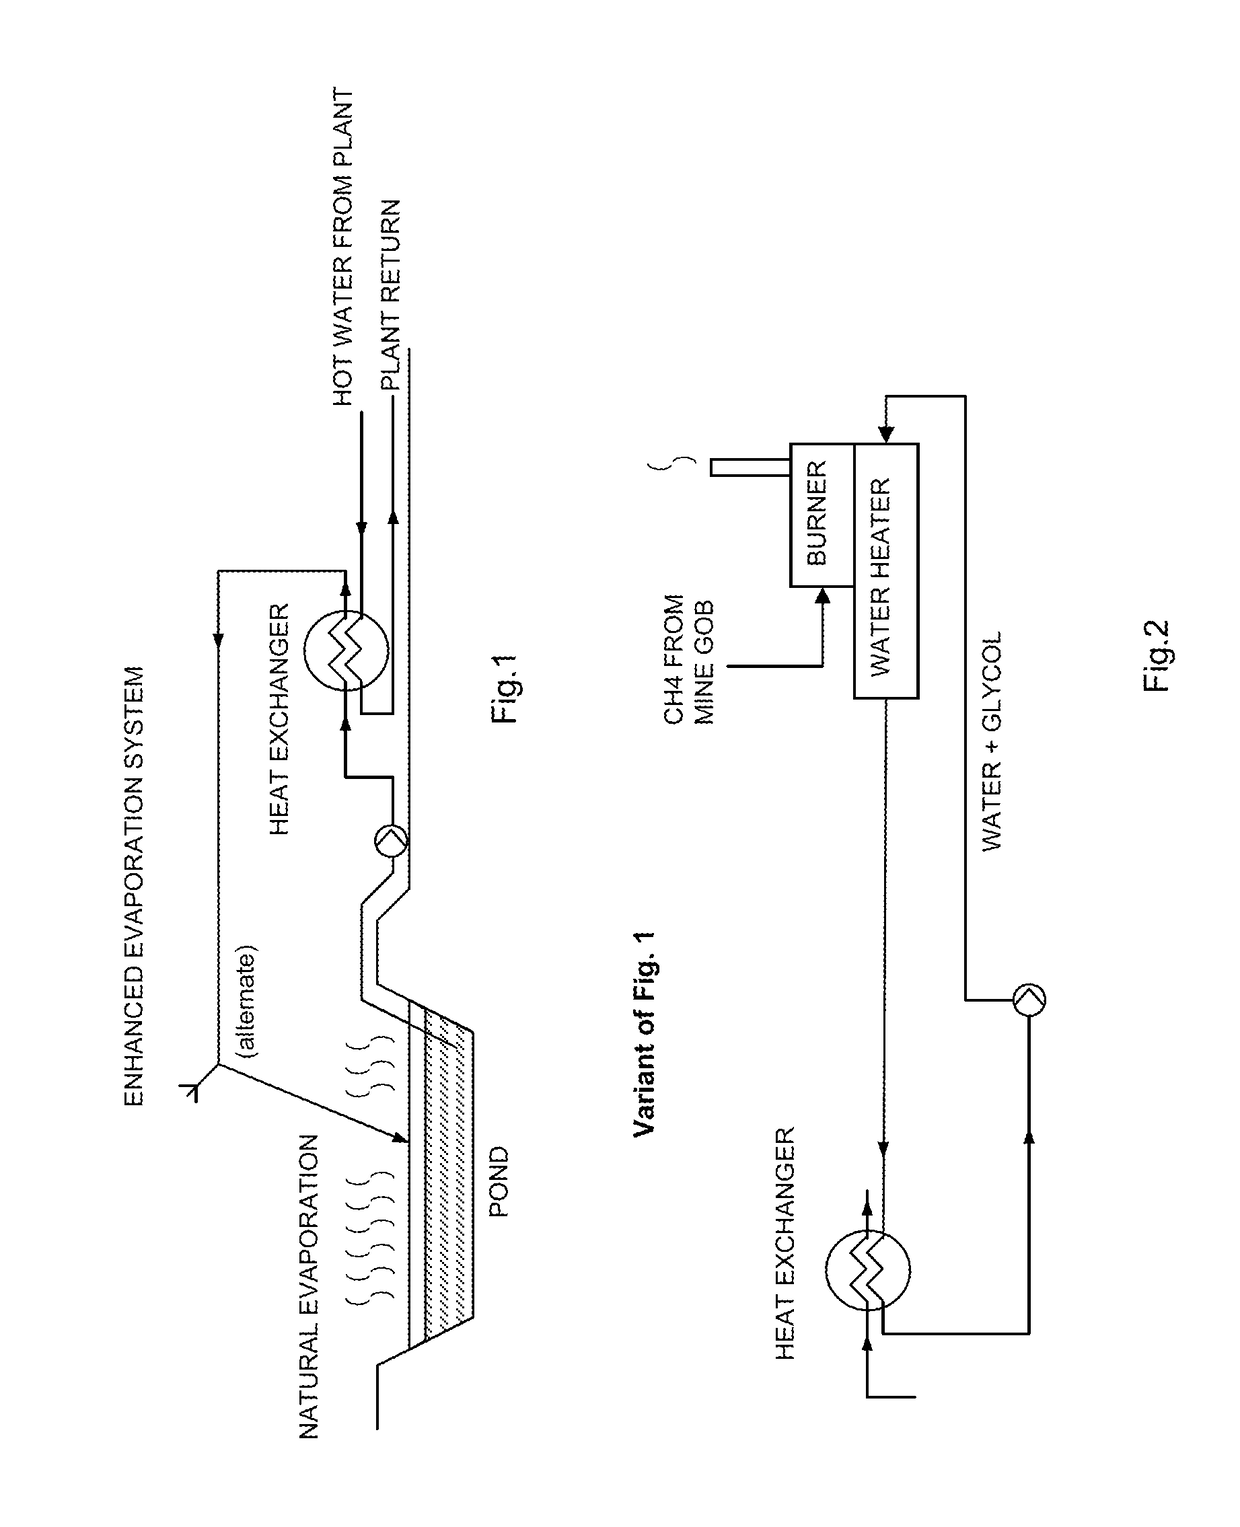 Method for increasing evaporation rate of an evaporative pond